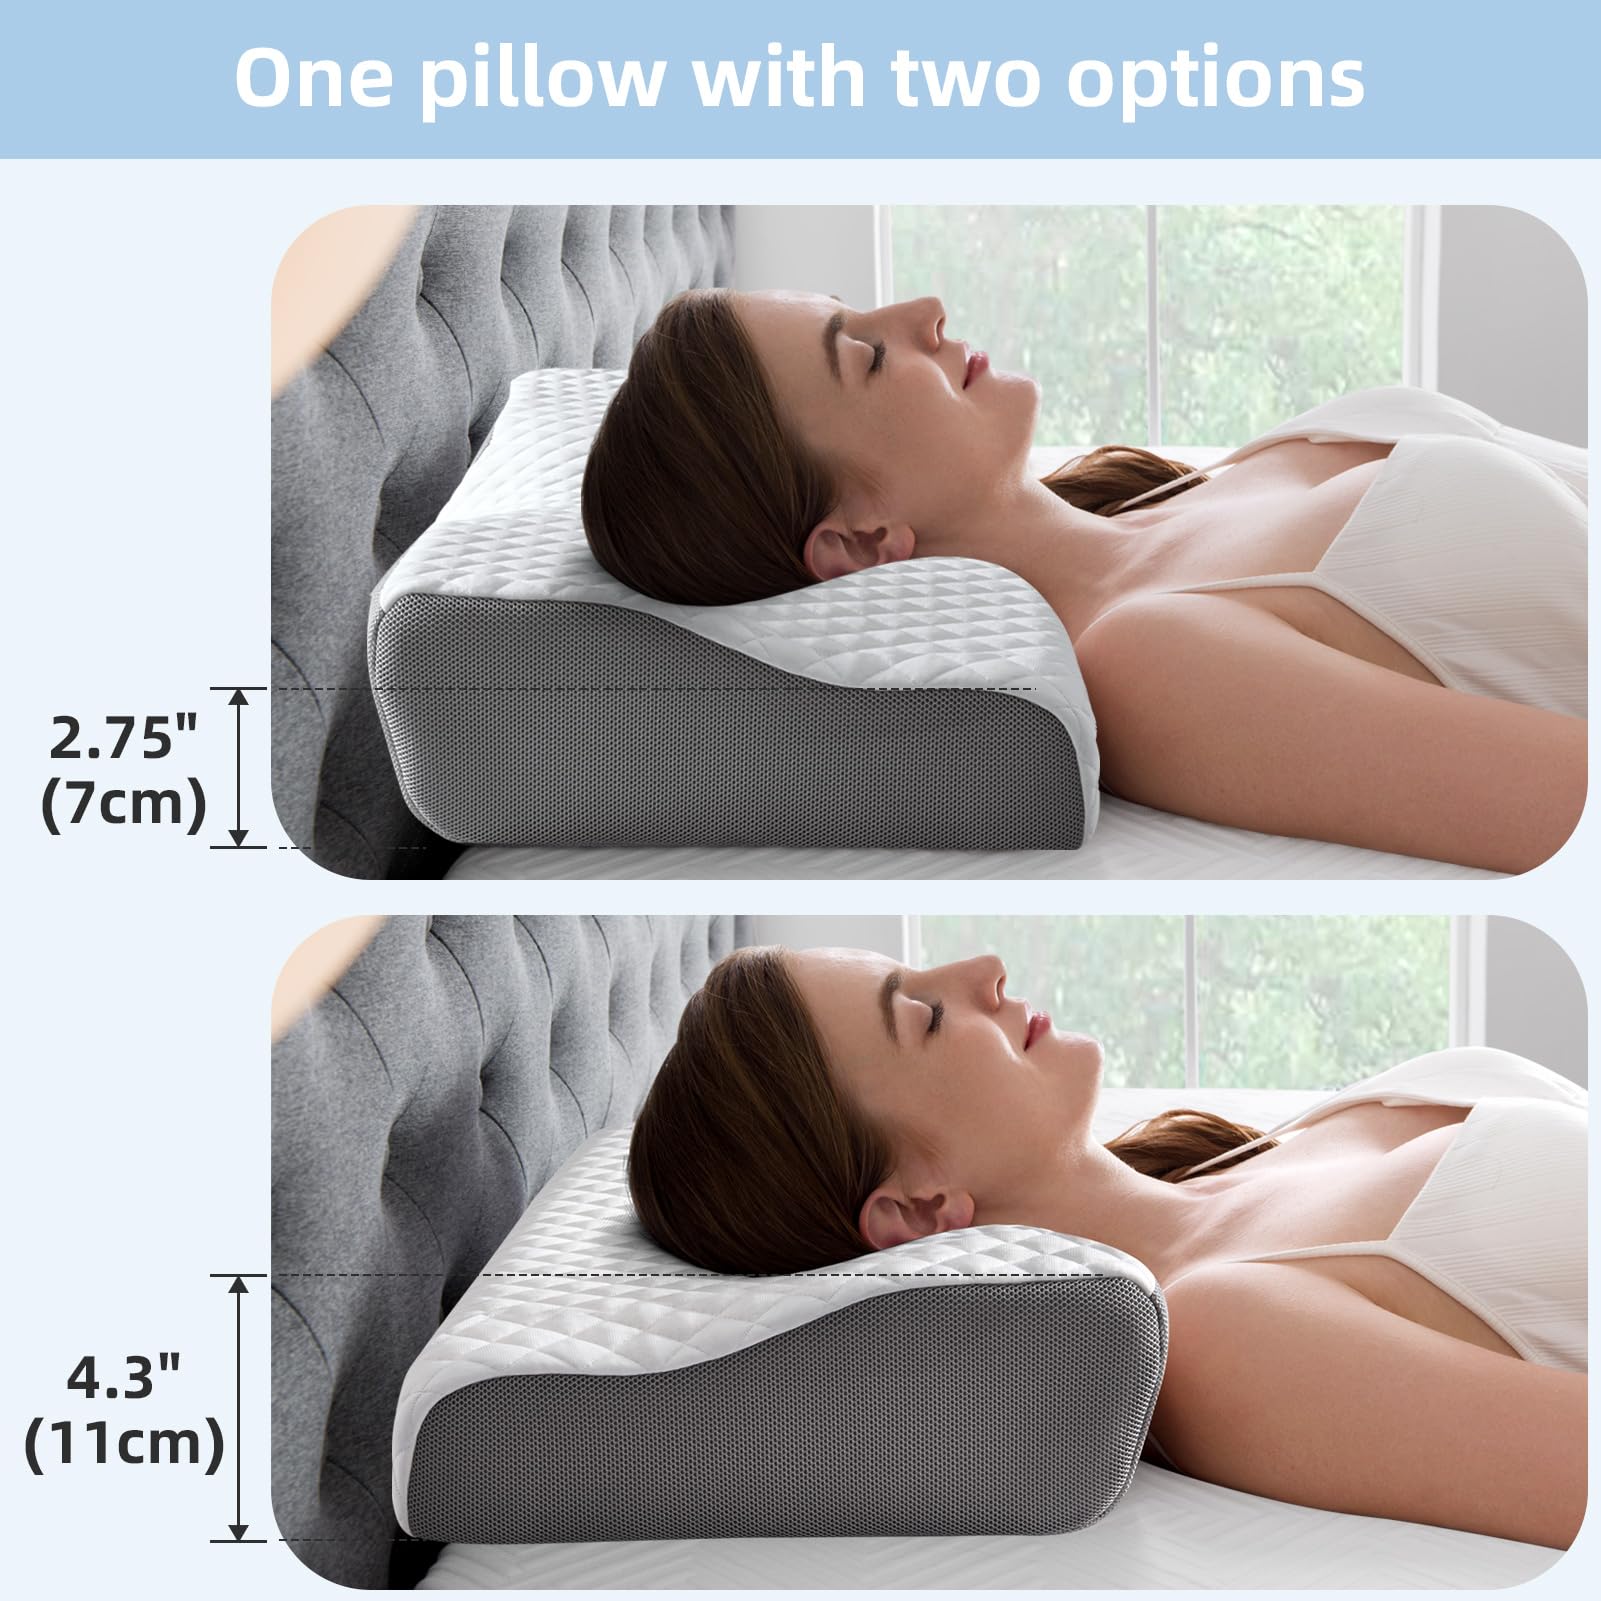 NOFFA Pillow with Neck Support for Sleeping,Cervical Pillow for Side Sleepers,Cooling Gel Memory Foam Neck Pillow,Contoured Pillow,Cervical Spine Pillow